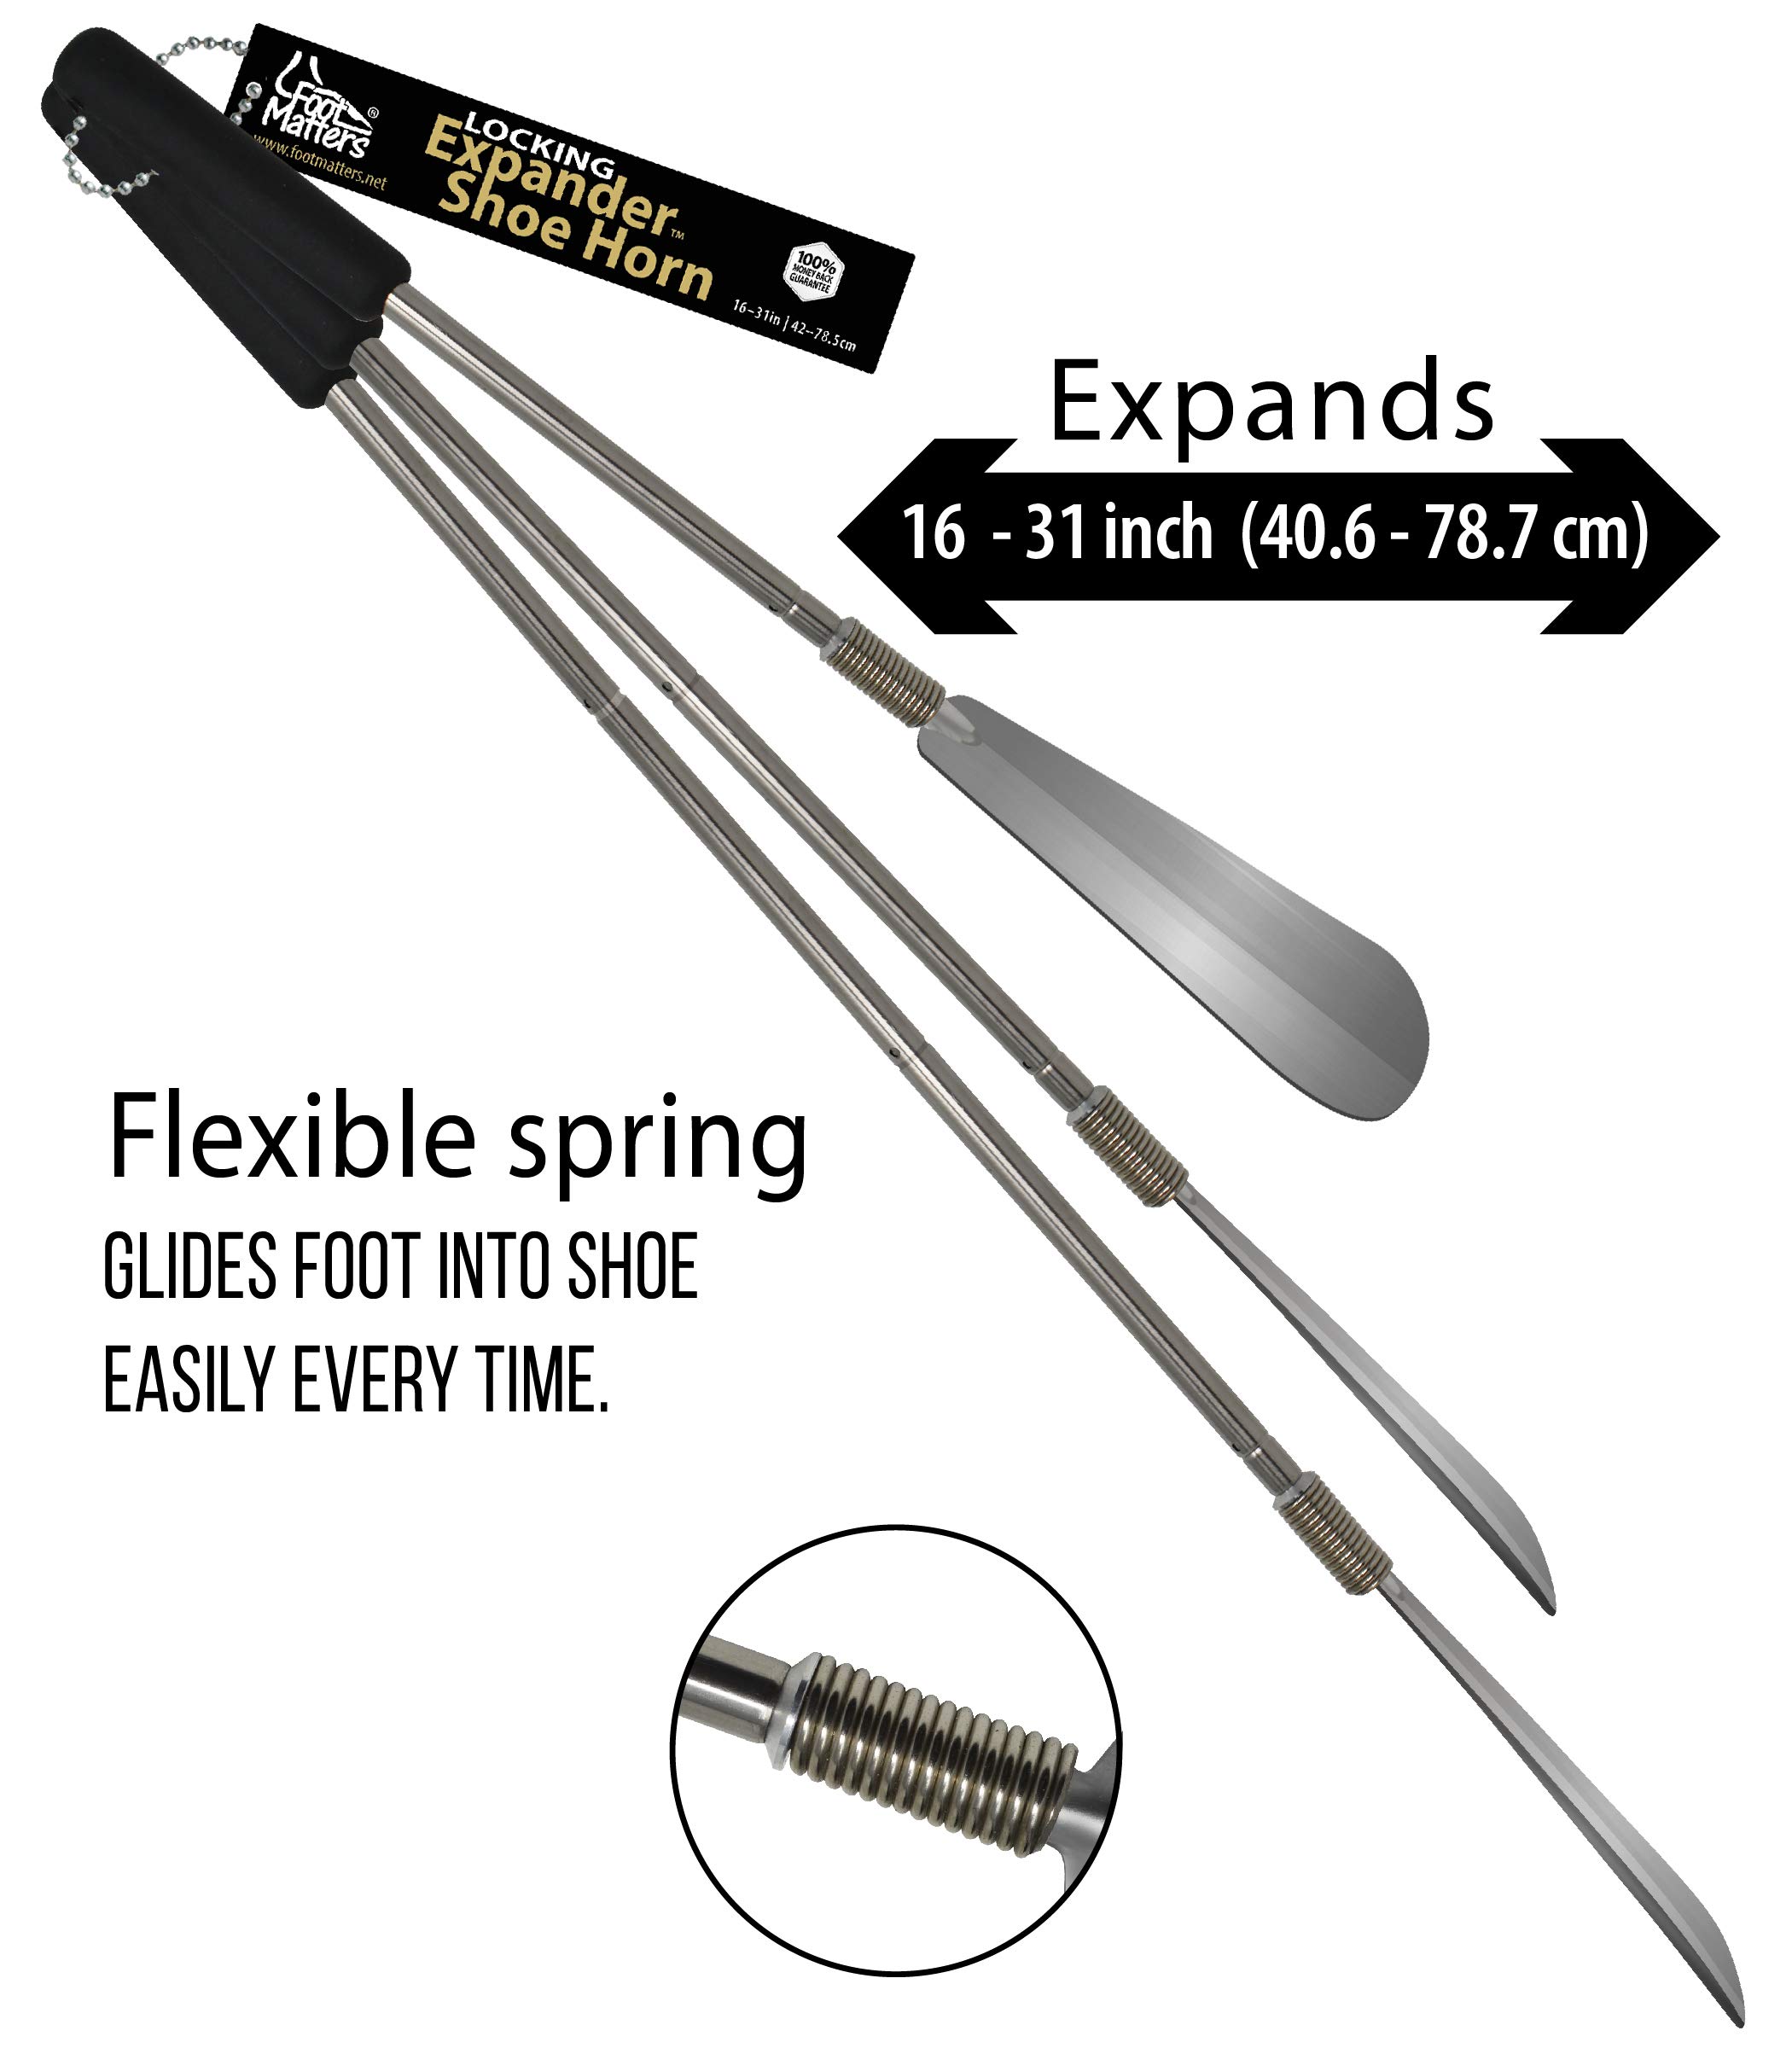 FootMatters Expander Shoe Horn Extra Long Handle - Twist to Lock - Extends 16 to 31 inches